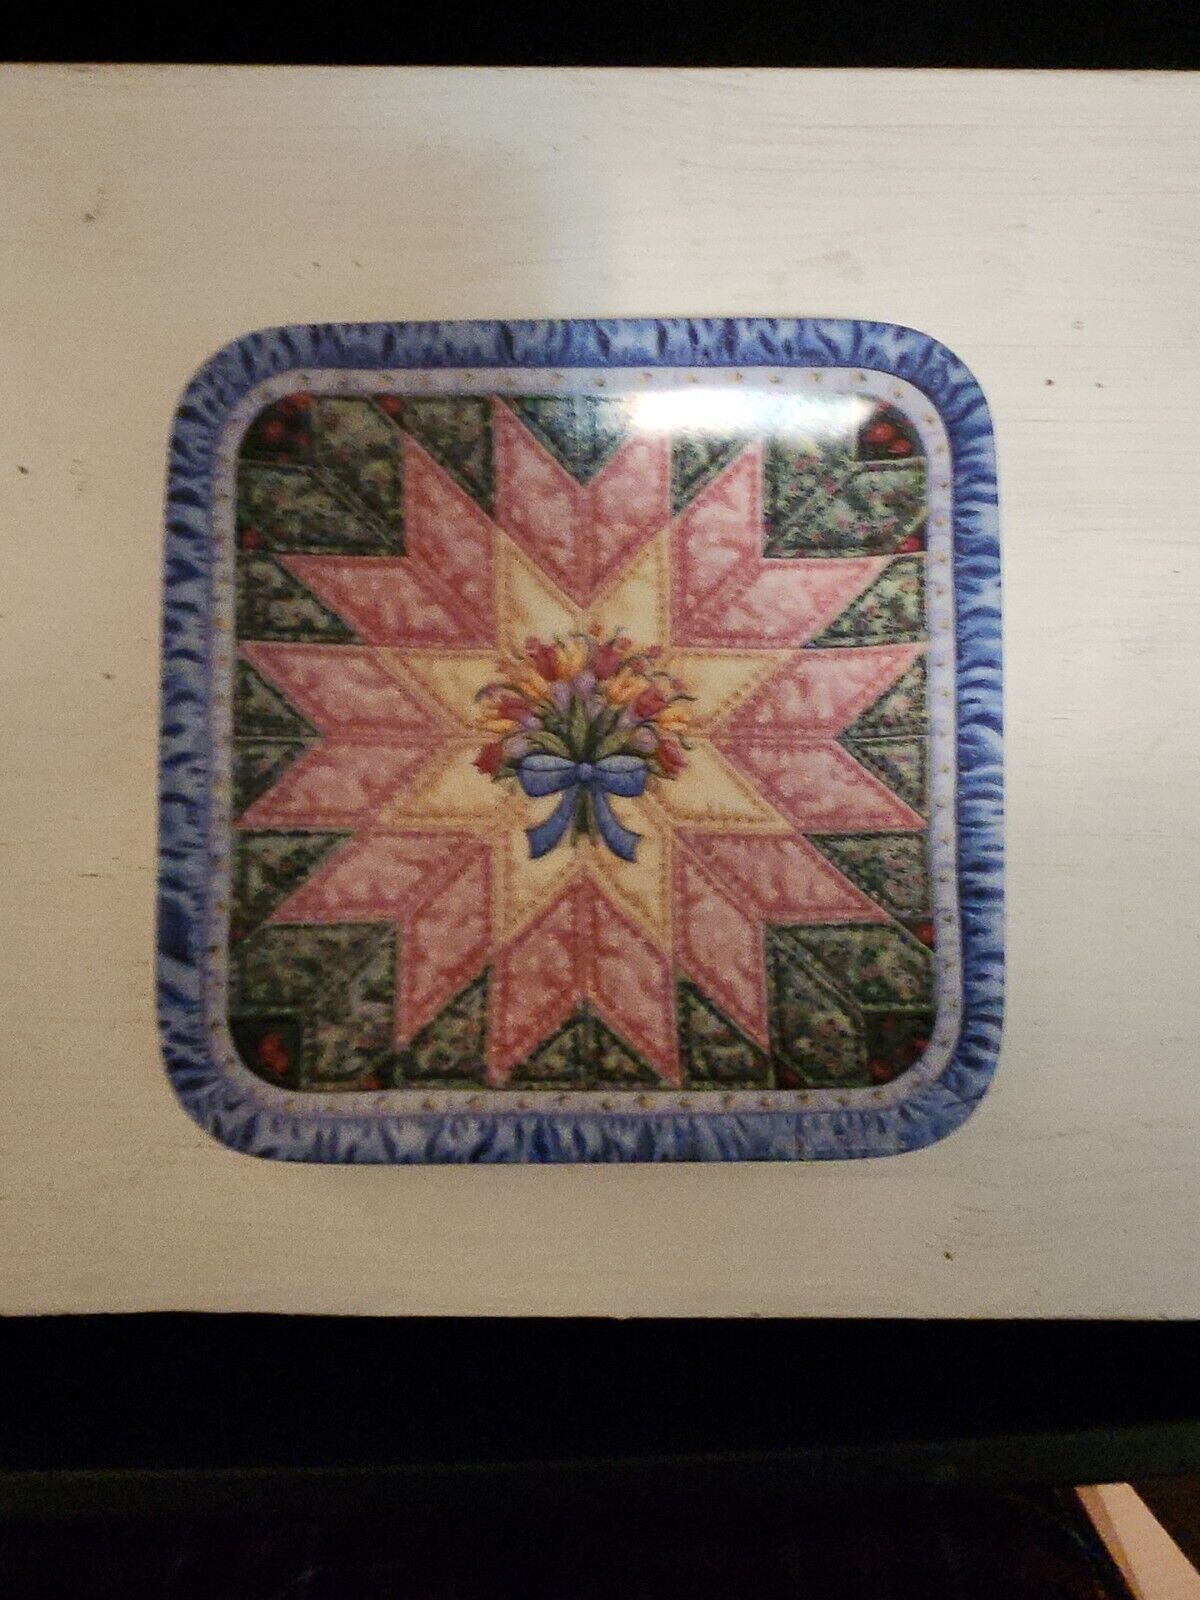 The Star Quilt, Ceramic Plate from Cherished Traditions, 1994 Bradford Exchange